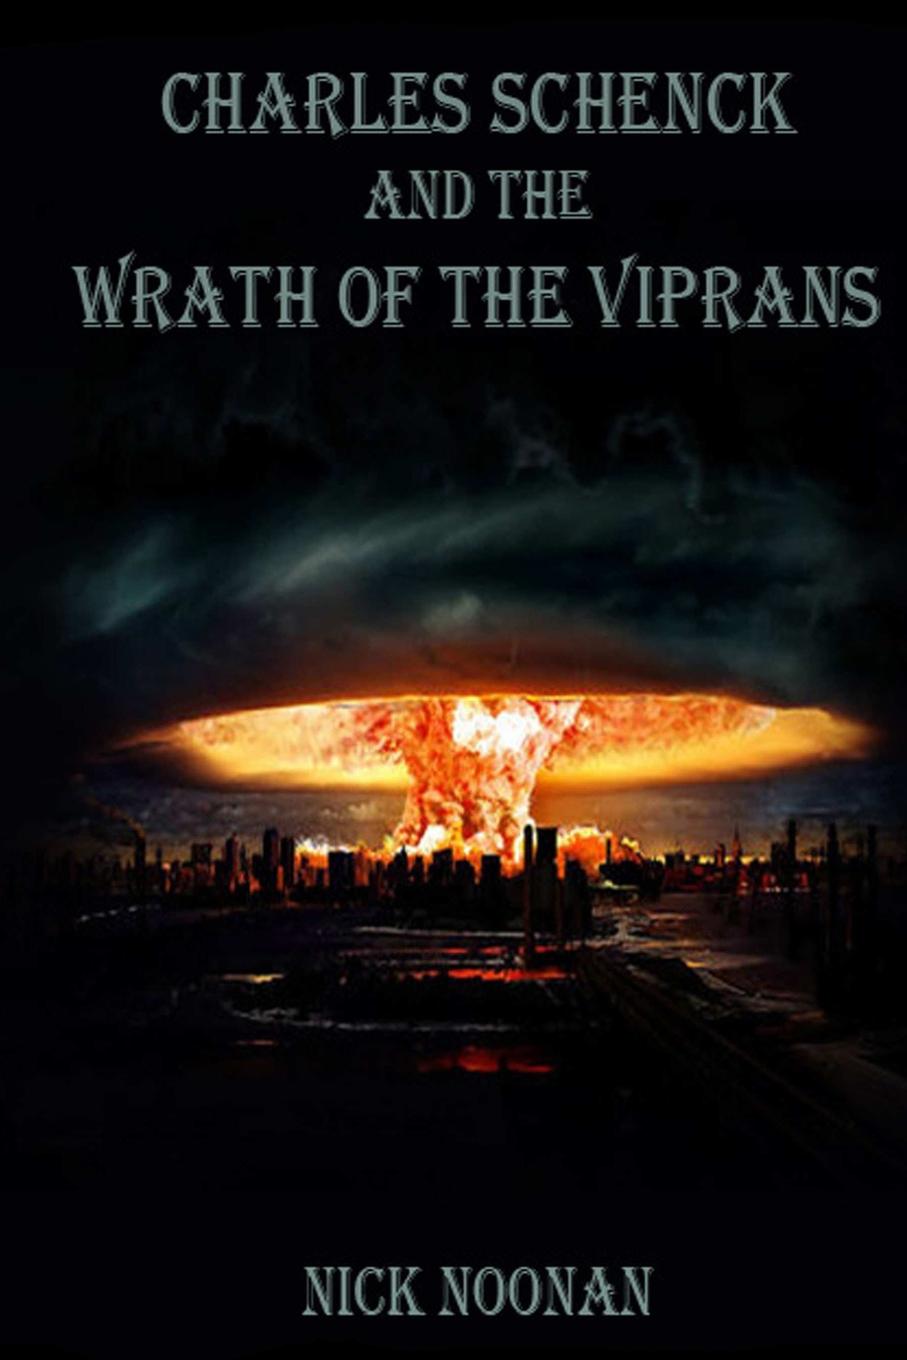 Charles Schenck and the Wrath of the Viprans